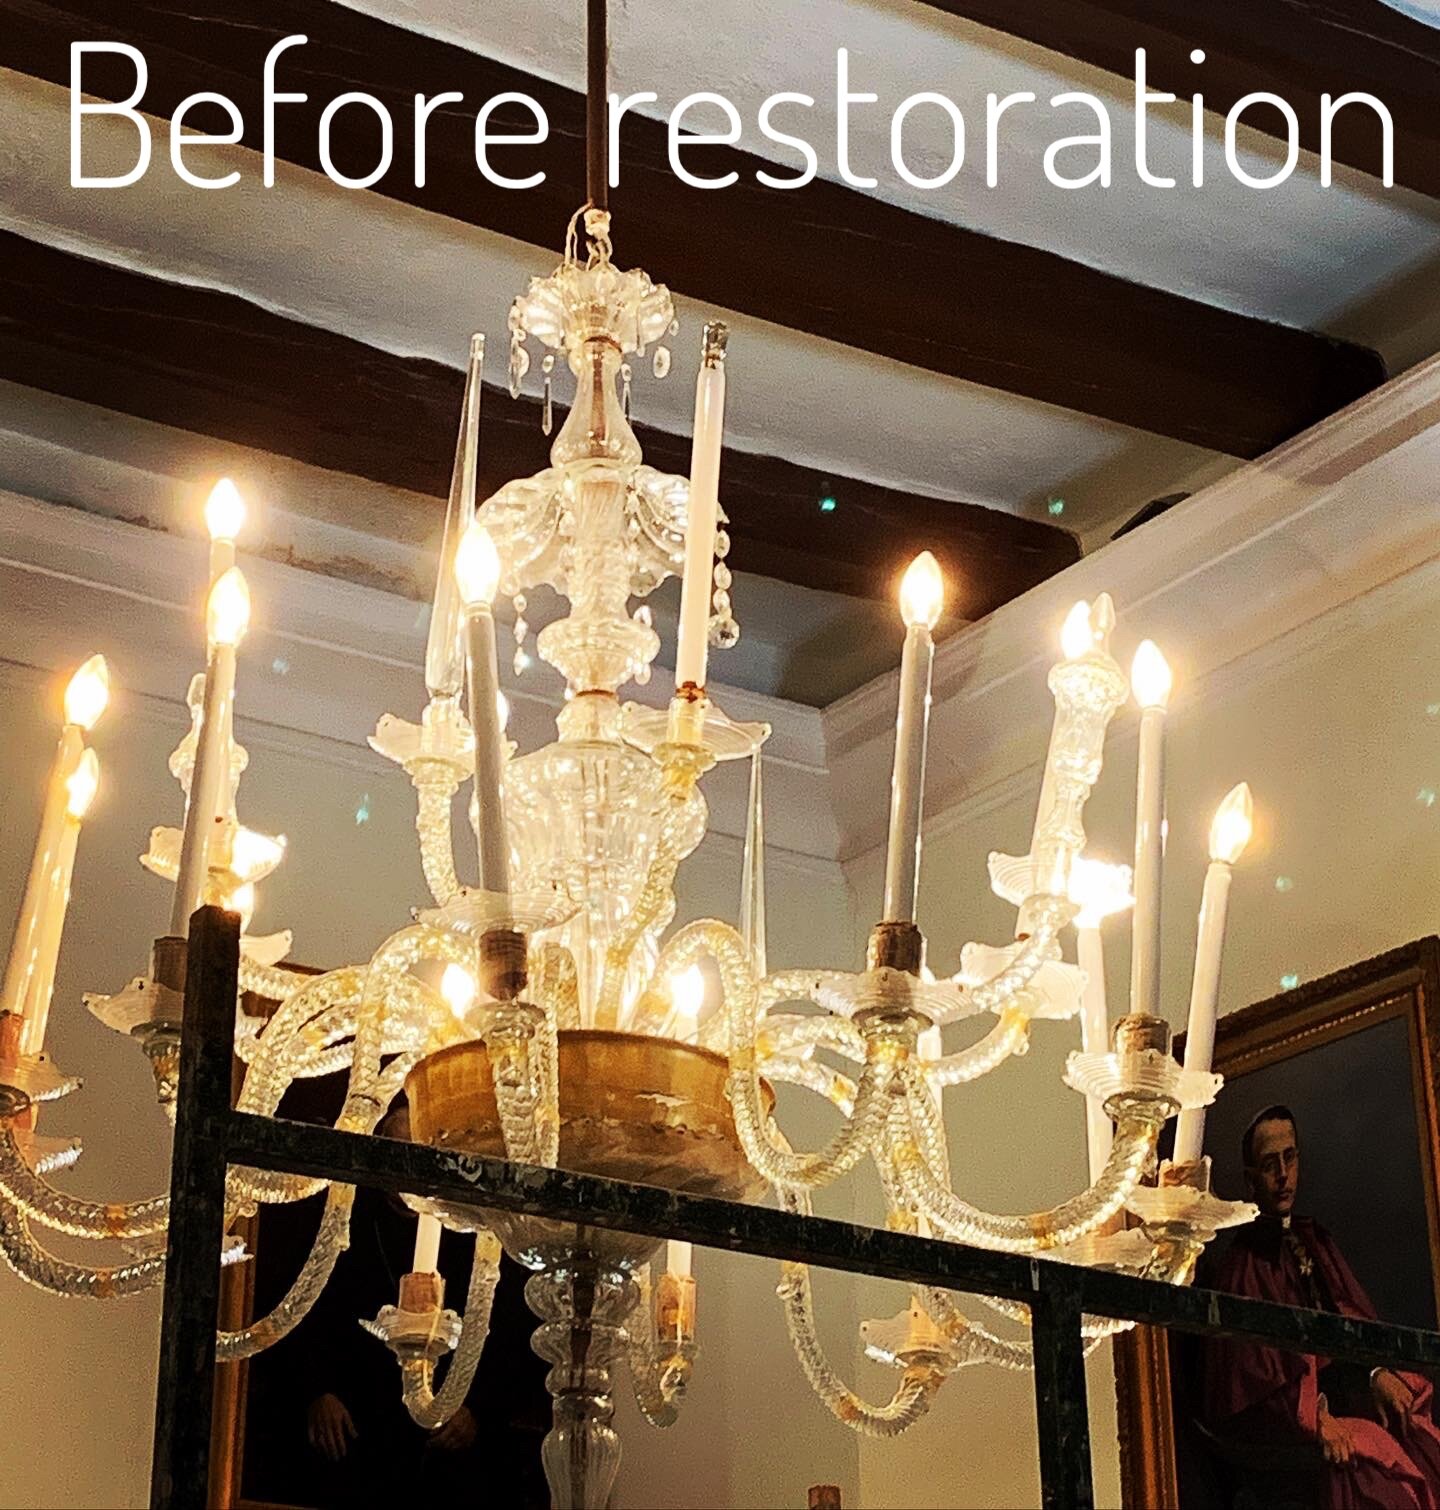 View of the chandelier before restoration